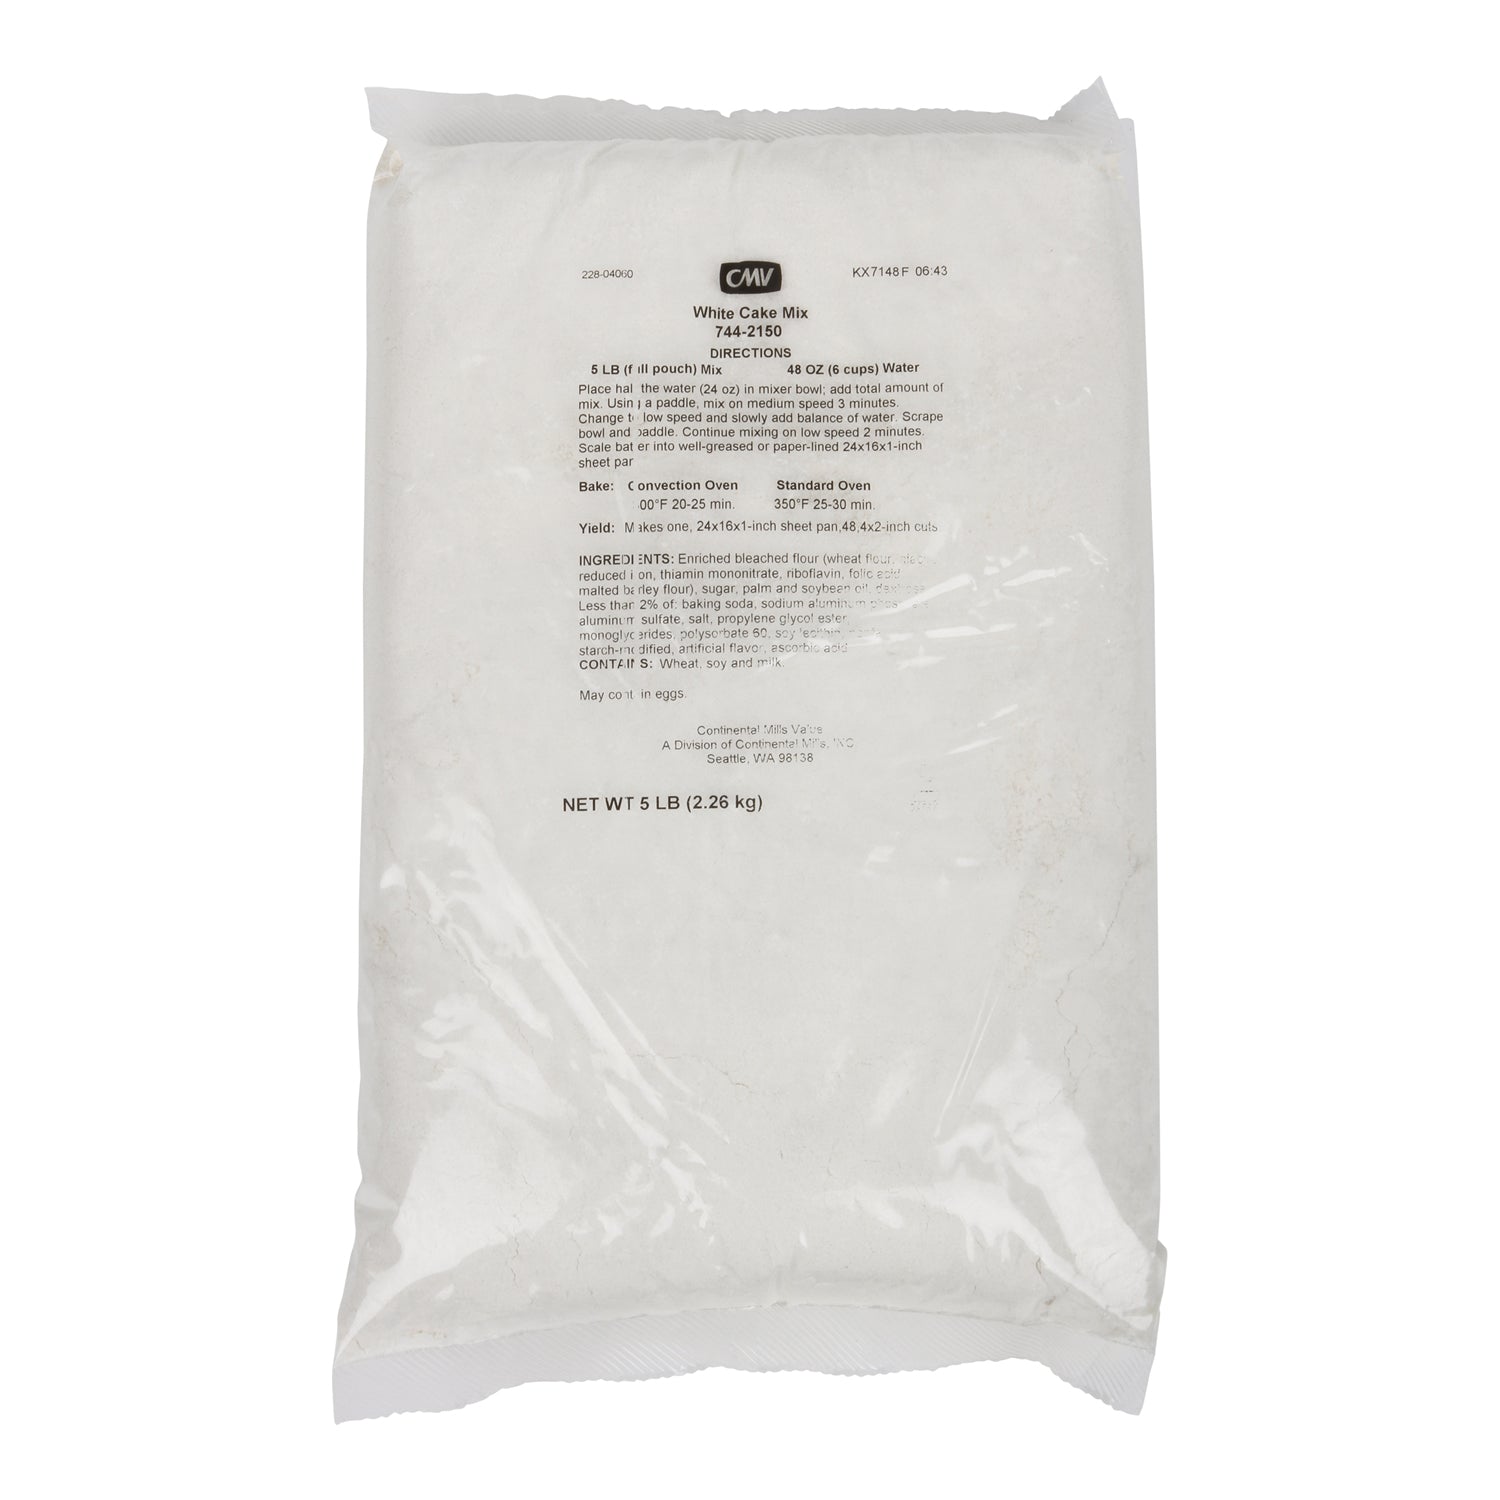 CONTINENTAL MILLS VALUE WHITE CAKE MIX